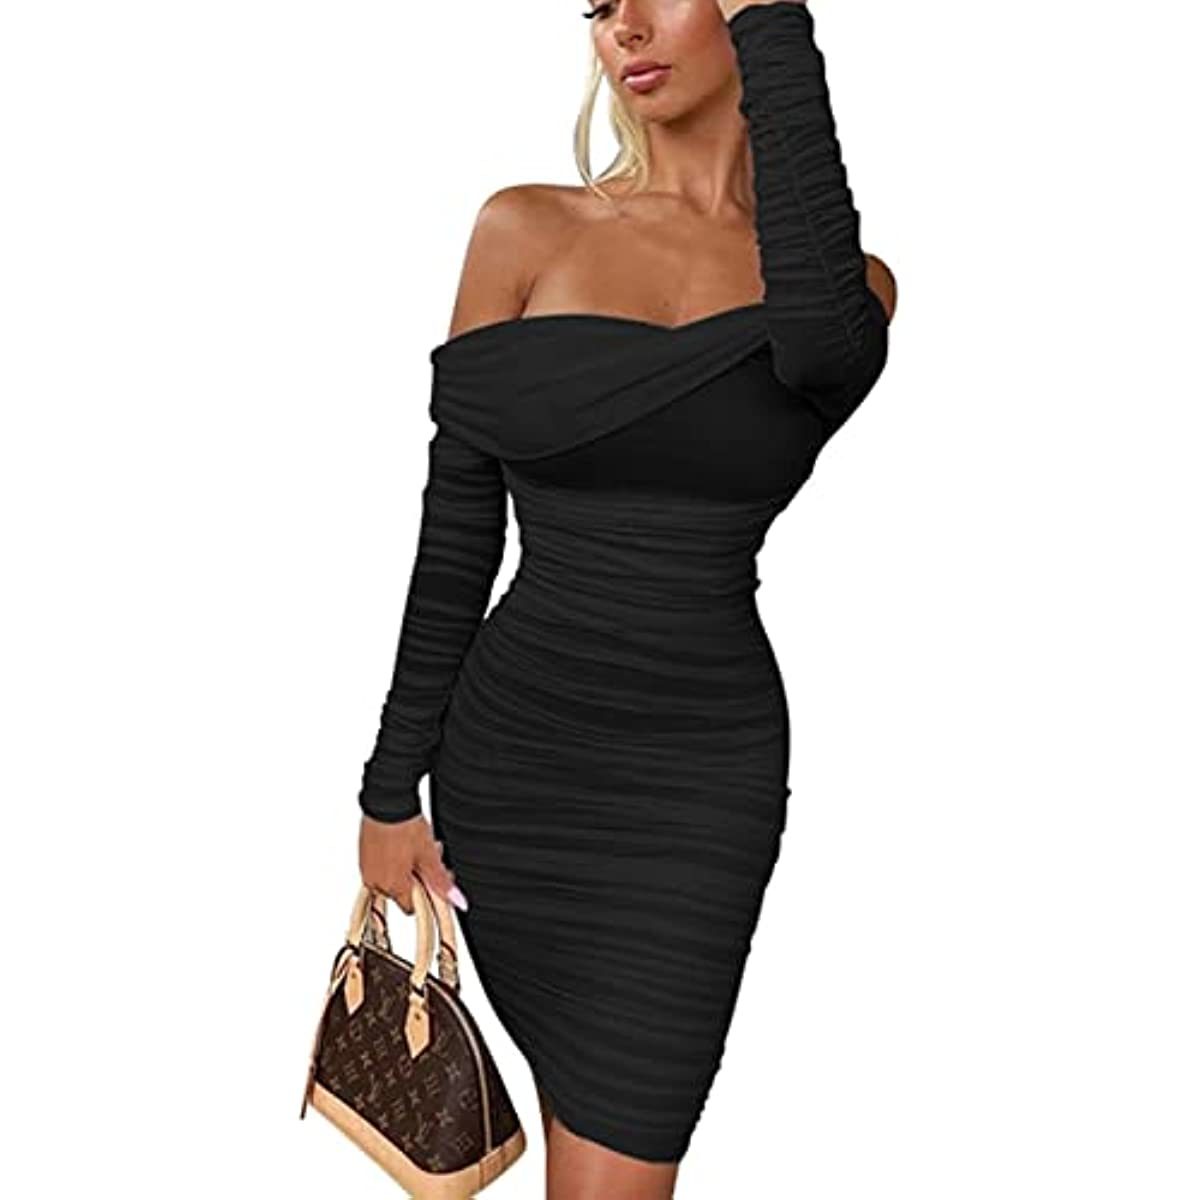 Women's Sexy Elegant Ruffle Long Sleeve Off Shoulder Ruched Party Mini Dress